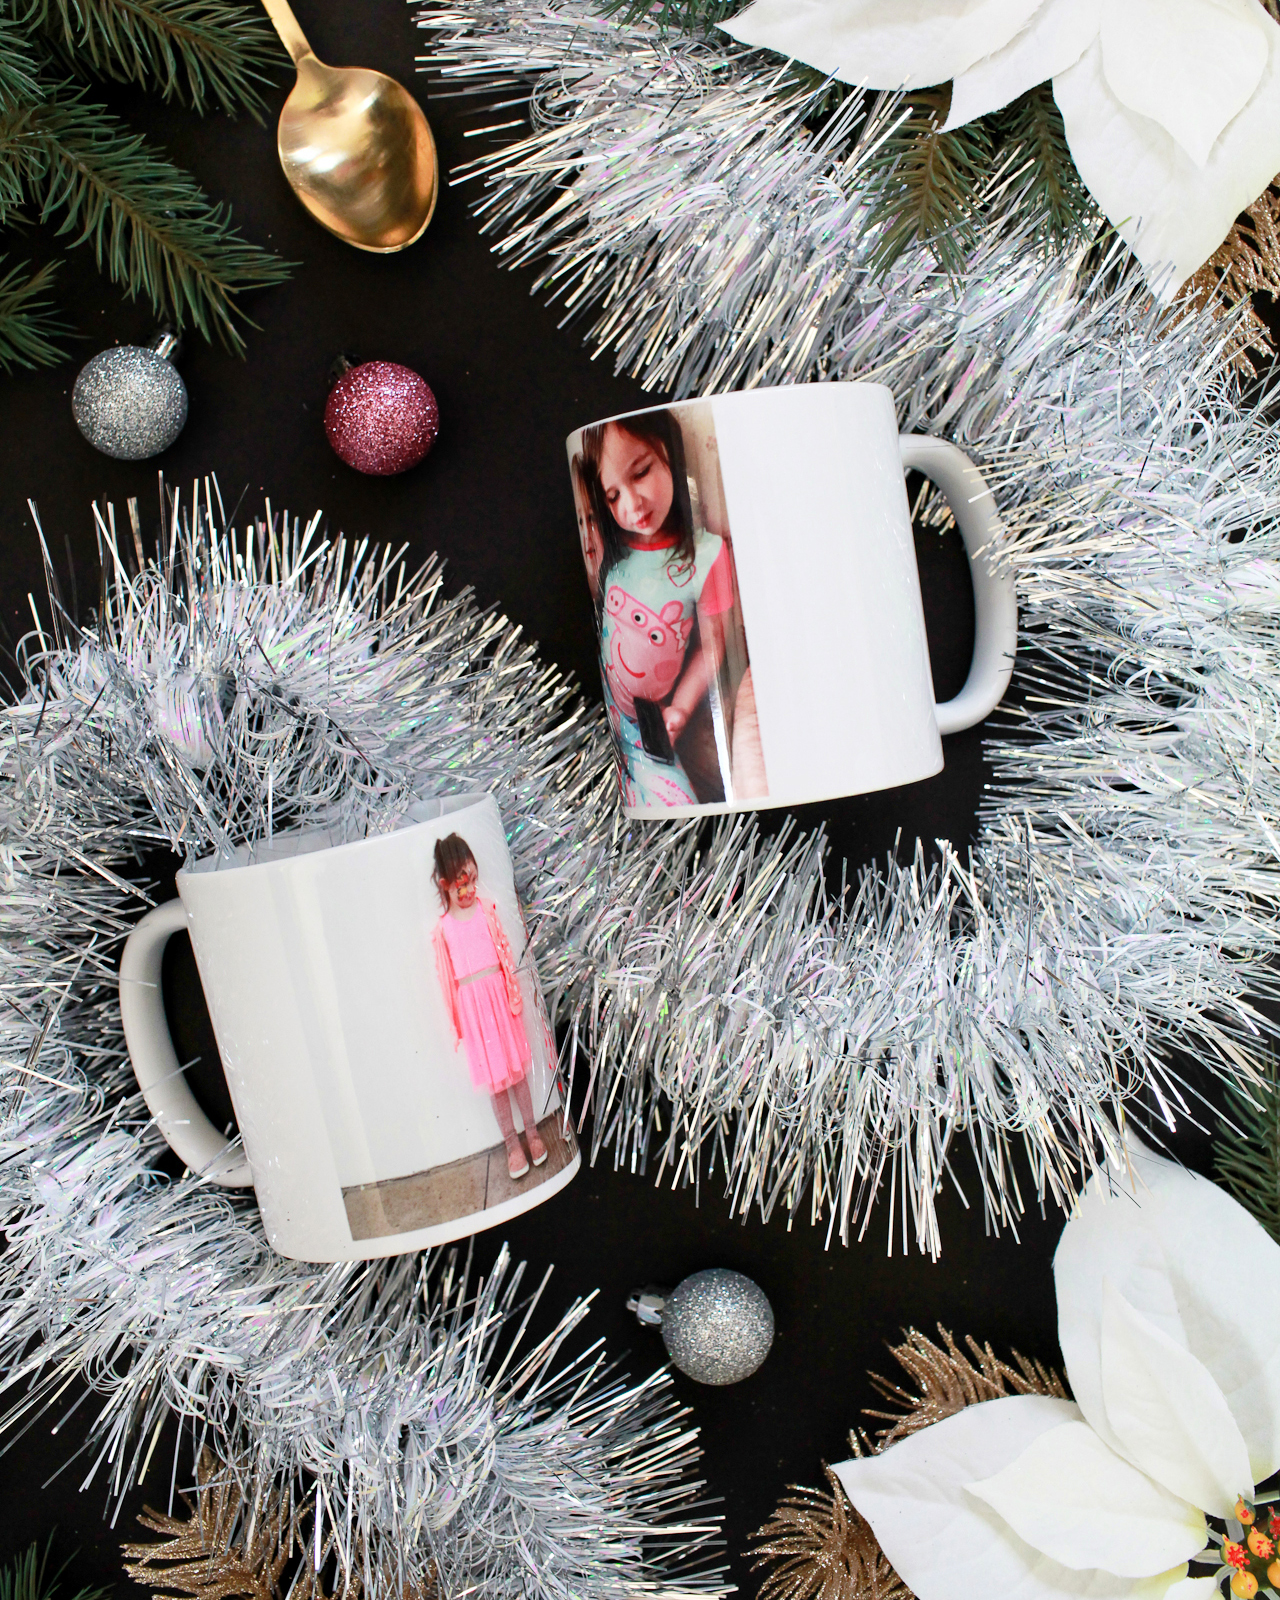 Personalized and Photo Holiday Gifts with Zazzle